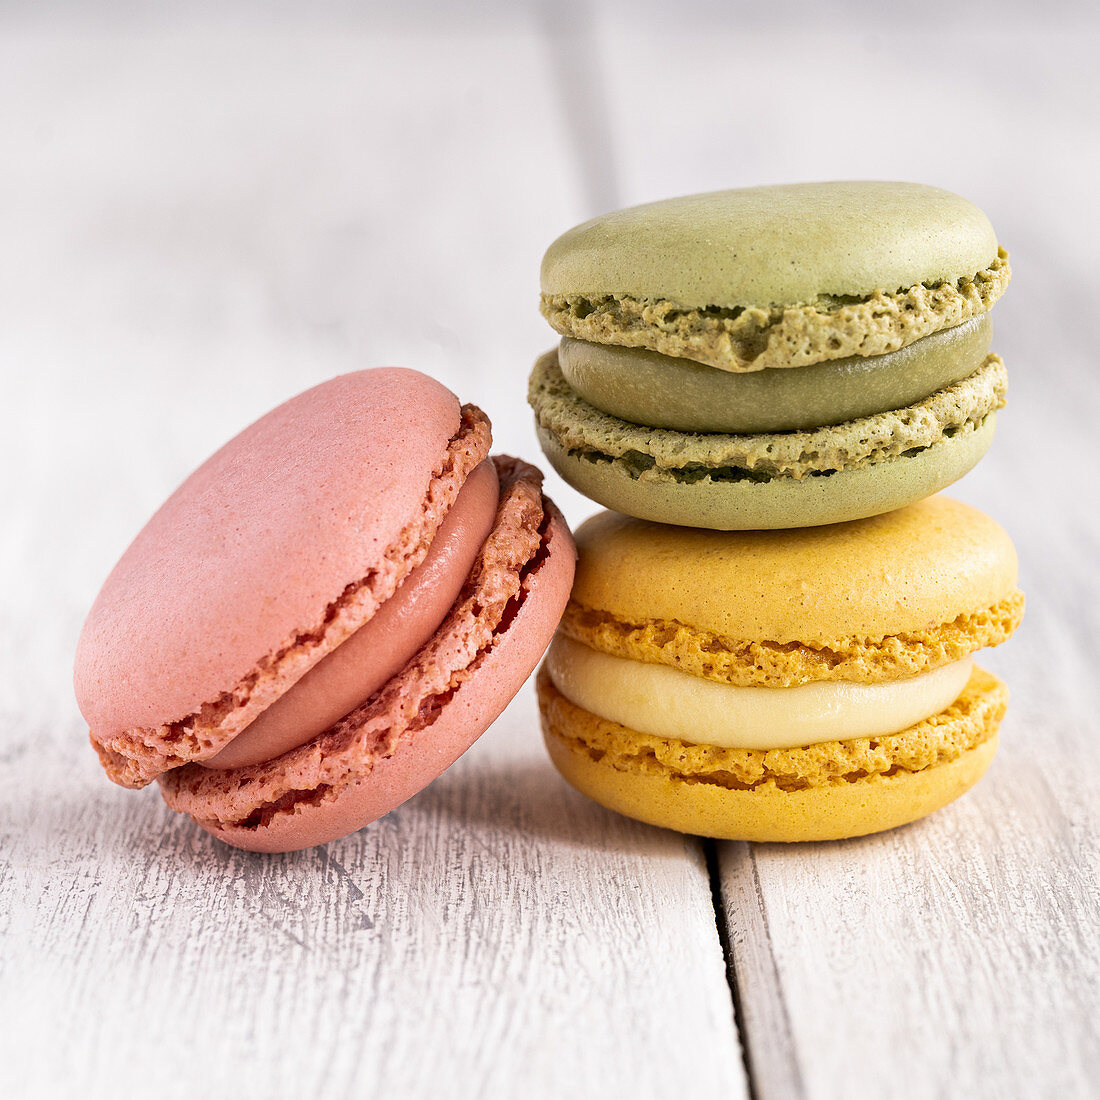 Colorful macaroons stacked in pile against wooden white surface